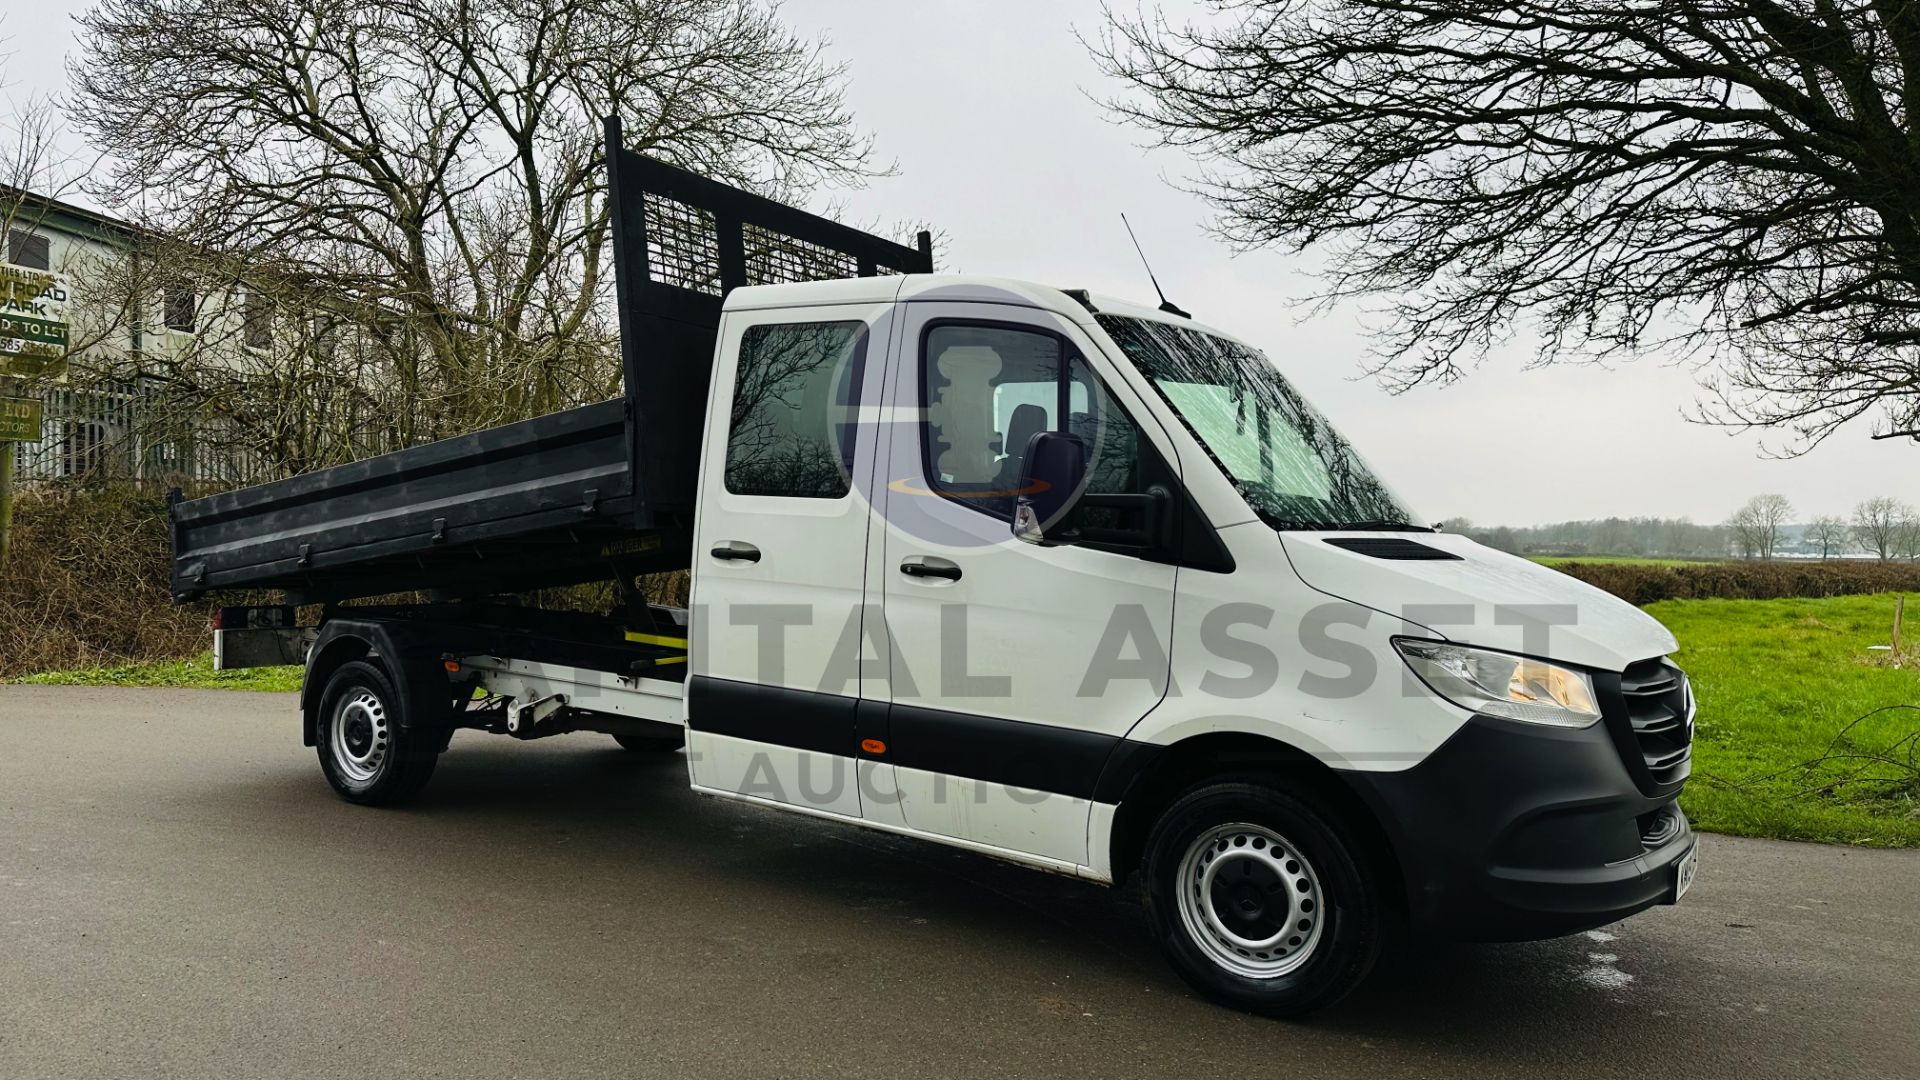 (On Sale) MERCEDES-BENZ SPRINTER 314 CDI *LWB - 7 SEATER D/CAB TIPPER* (2019 - NEW MODEL) *EURO 6* - Image 2 of 38